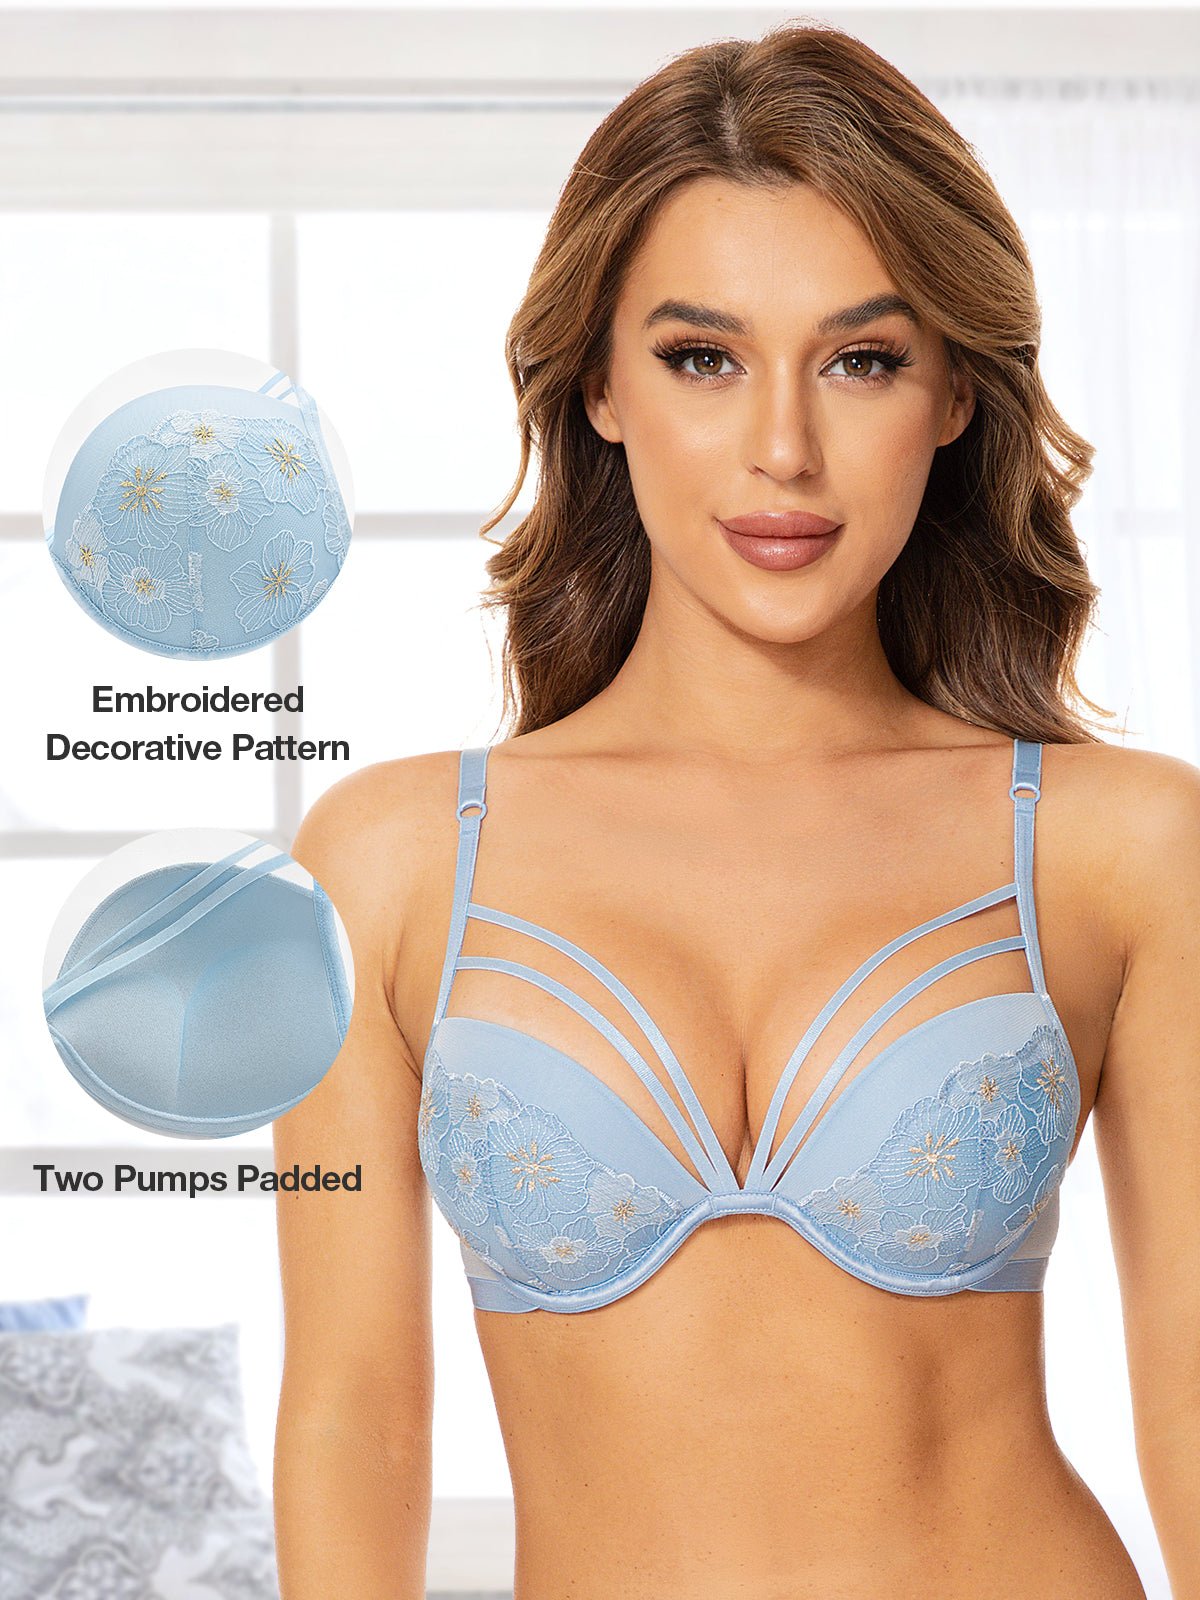 Bejeweled Embroidery Push-Up Bra